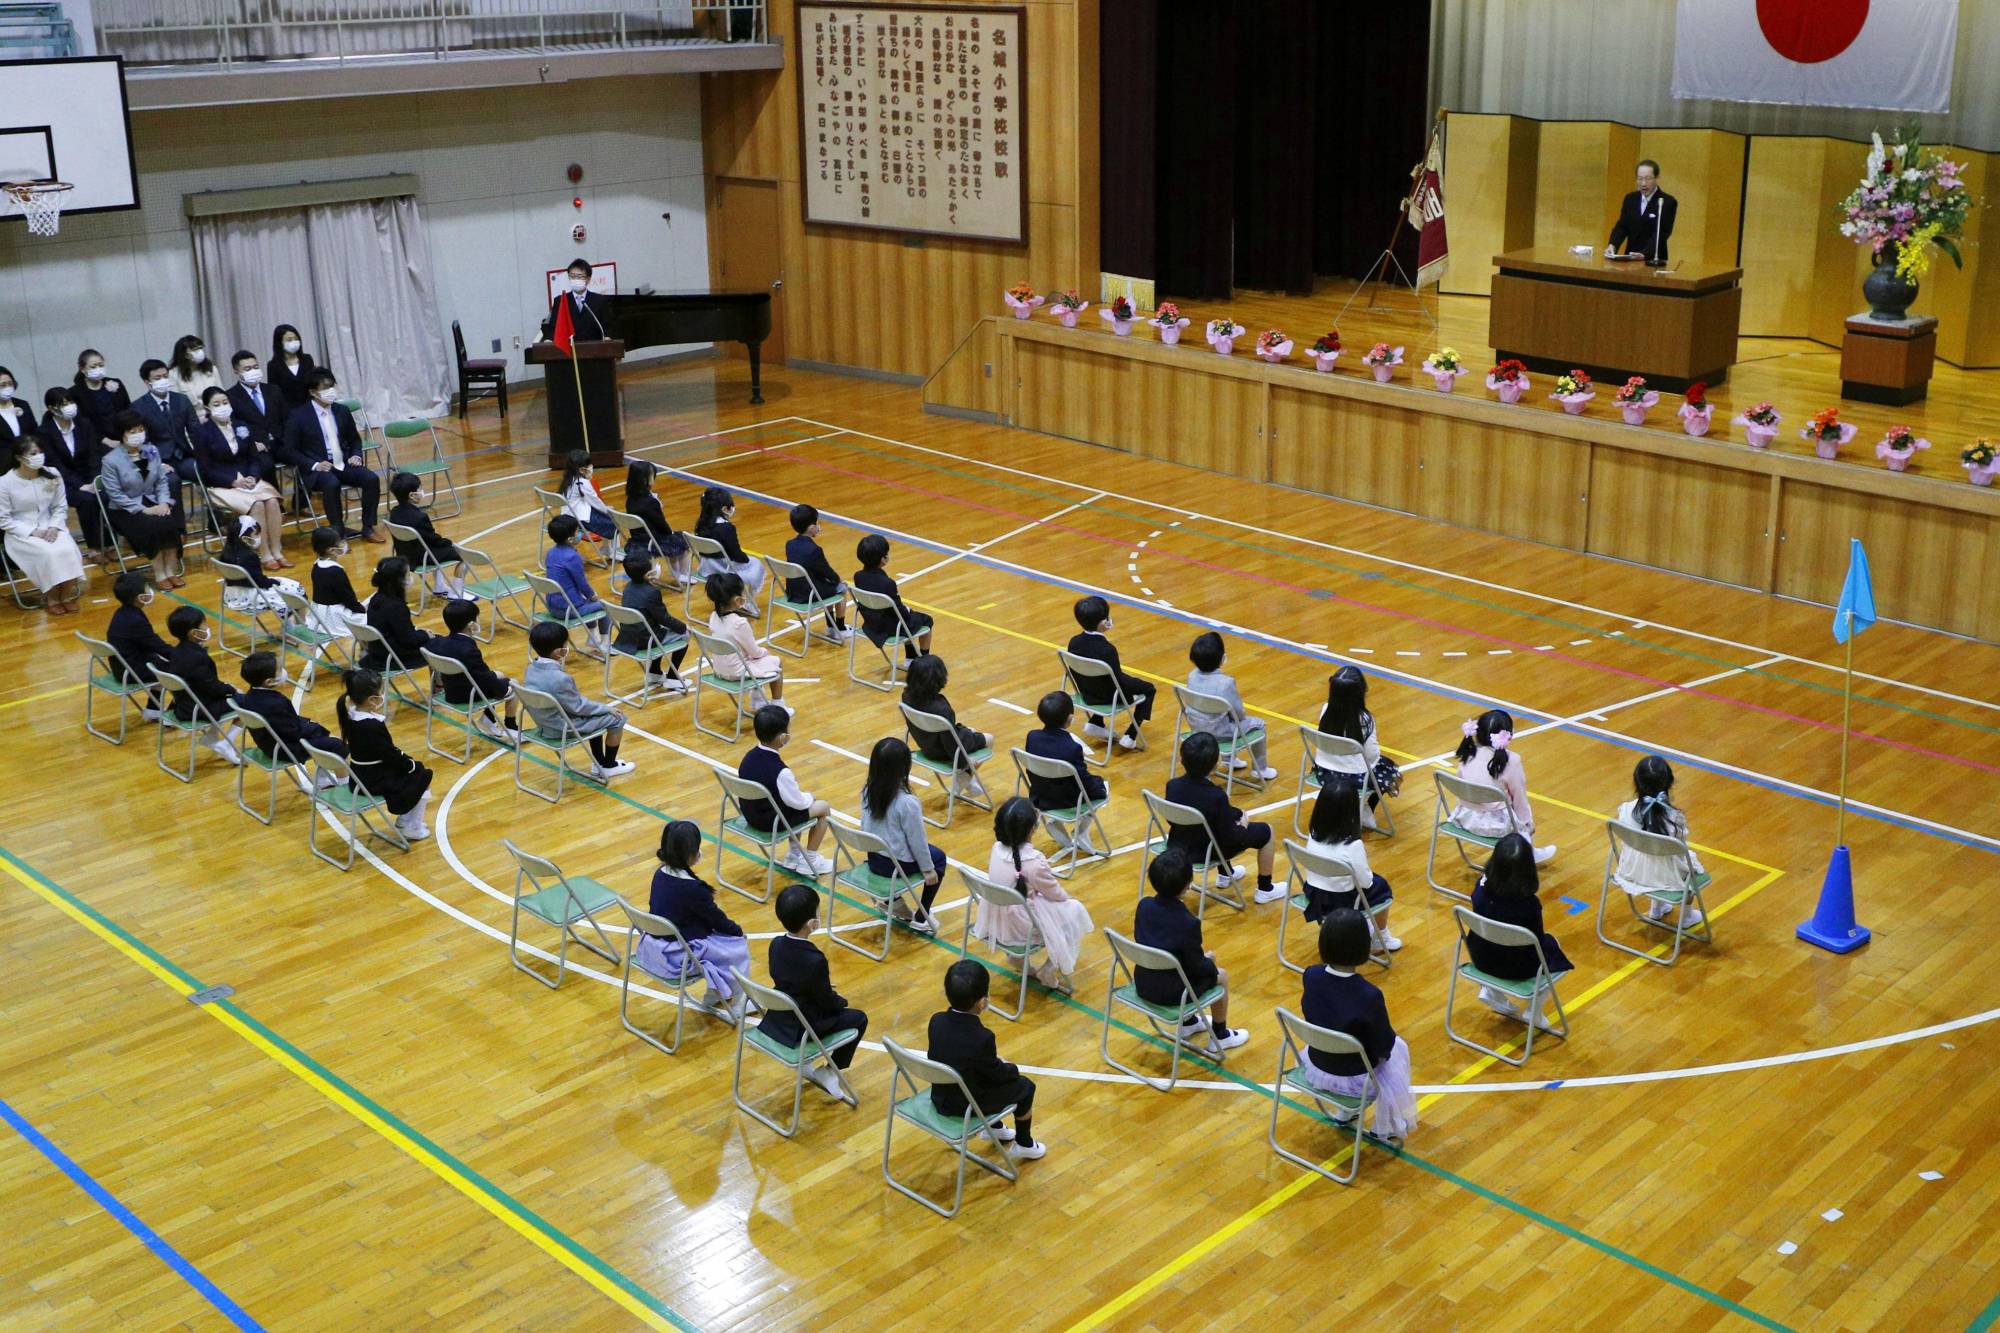 Children attend the entrance ceremony of an elementary school in Nagoya on Monday. | GETTY IMAGES